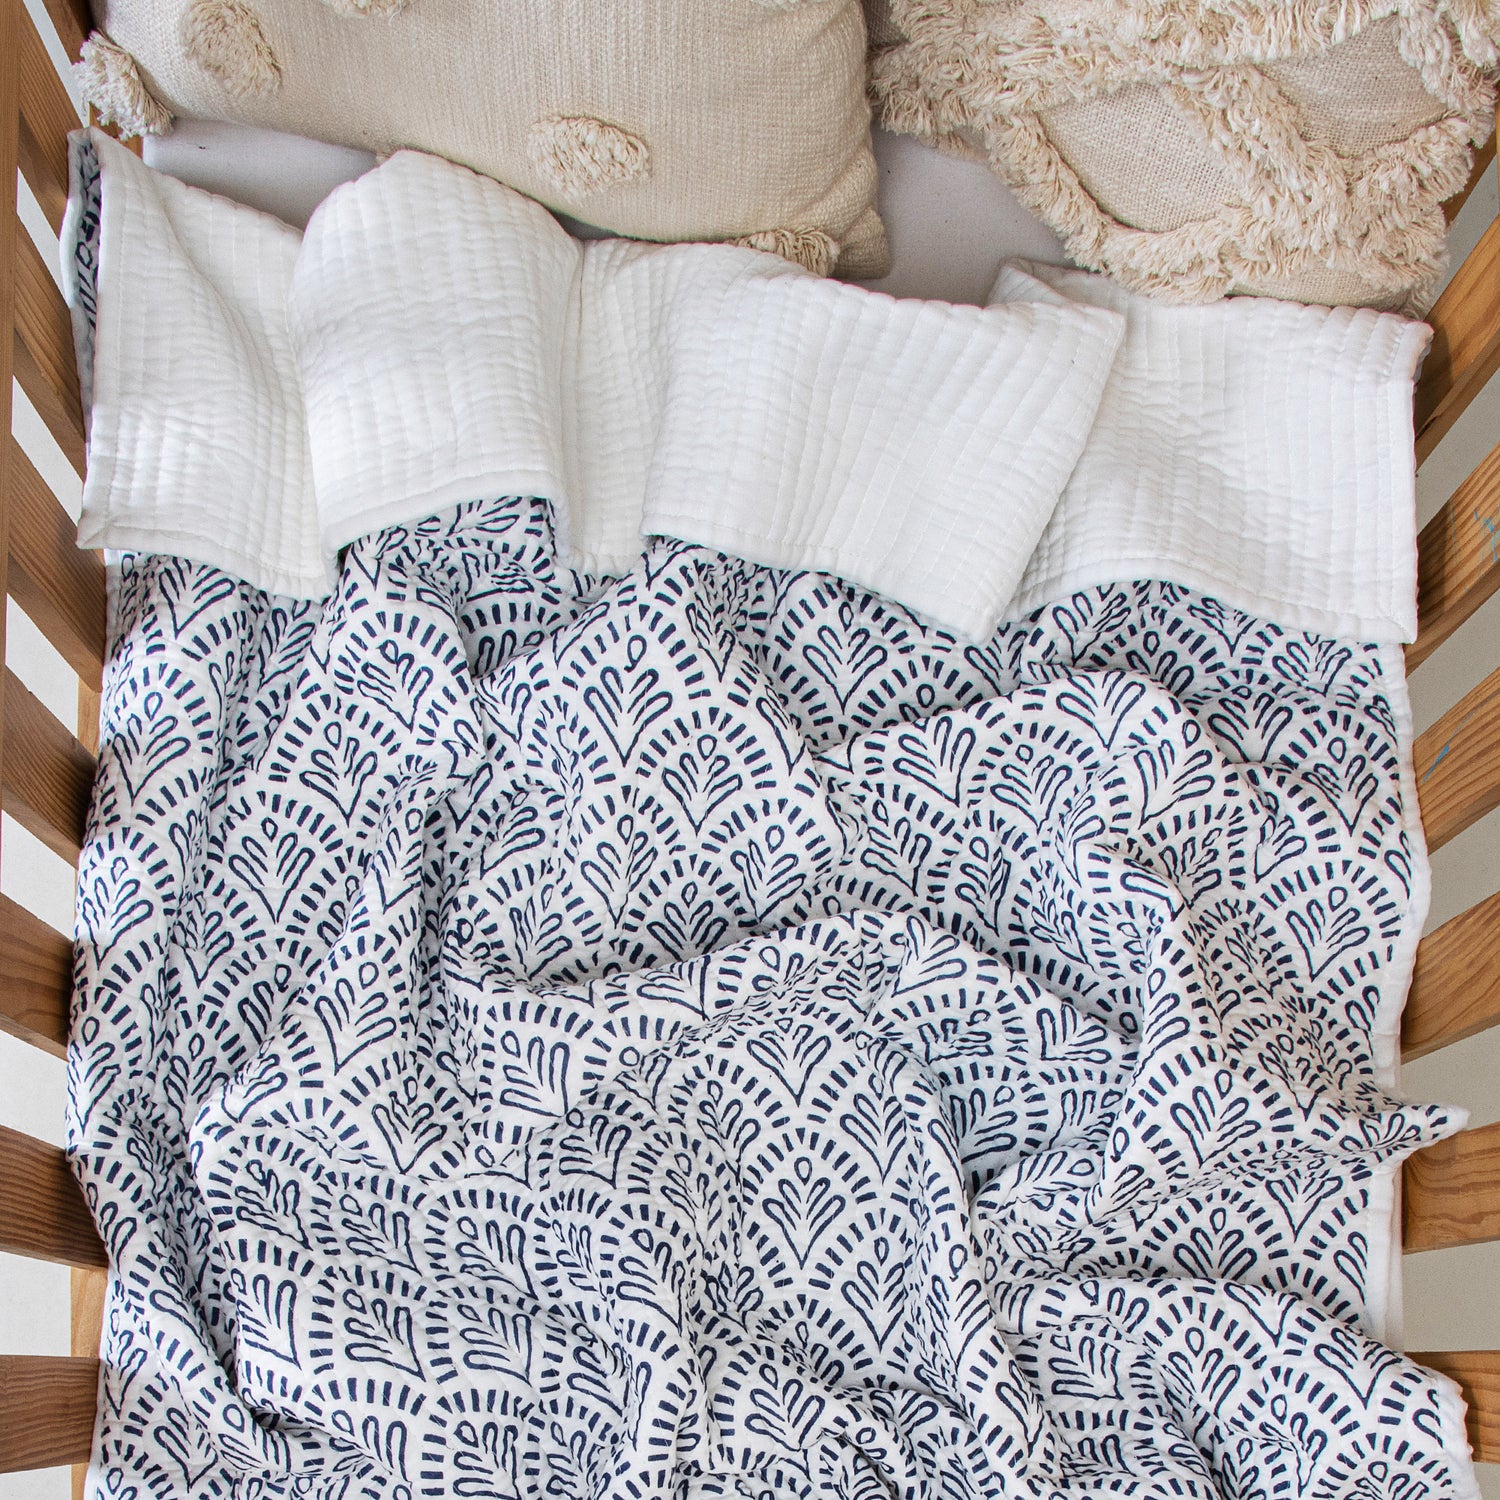 Blue Hand Printed Cotton Muslin Baby Blankets